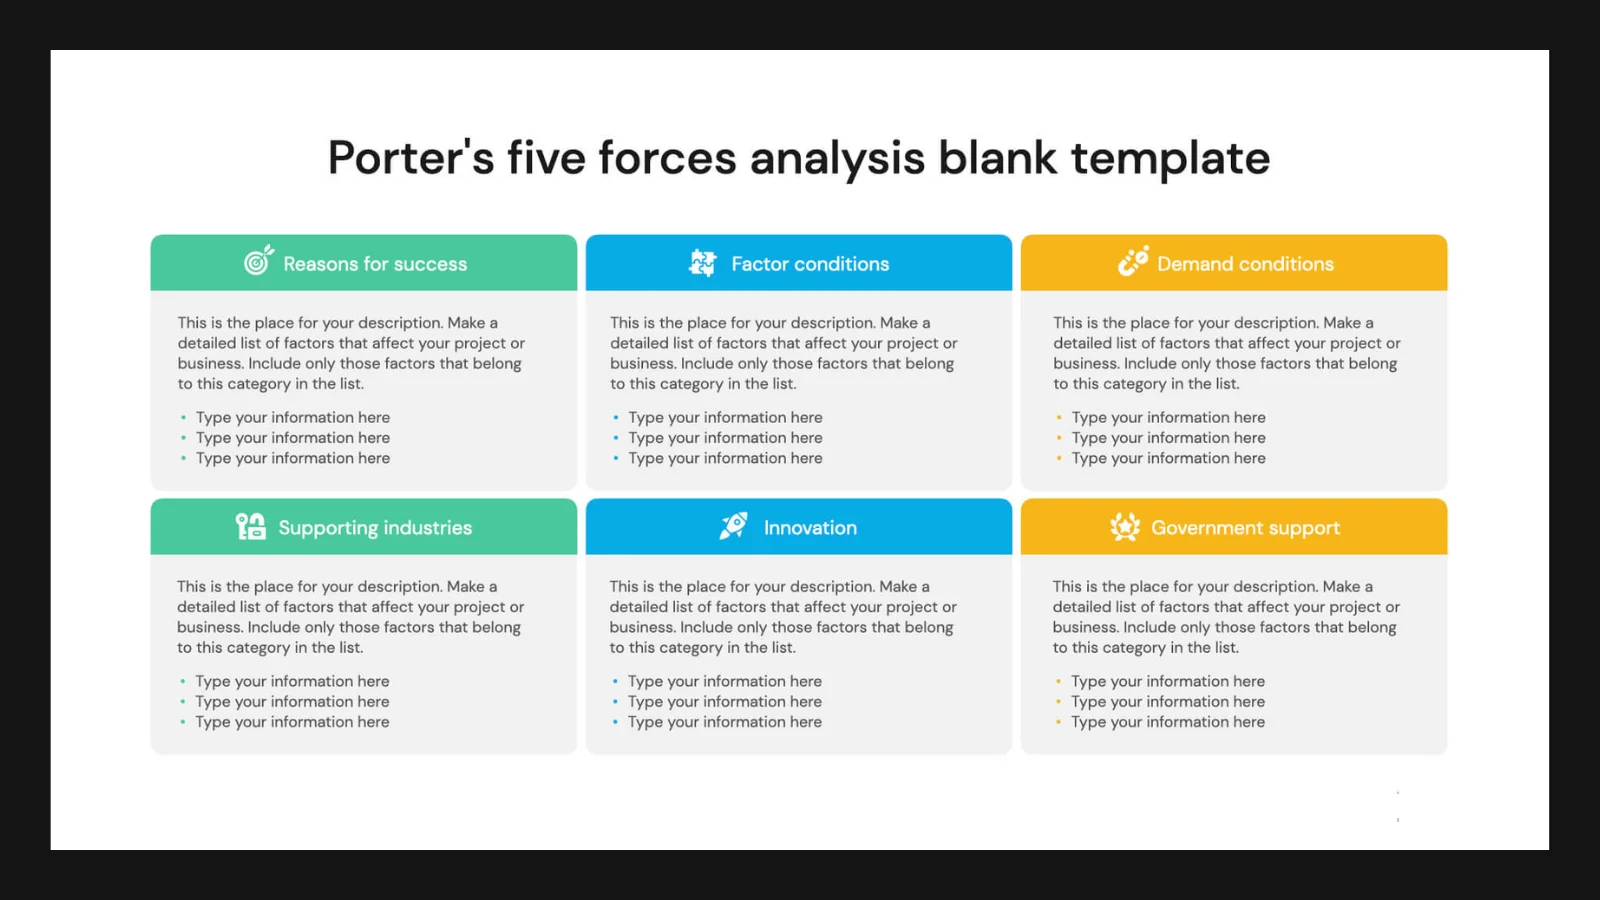 Porters-Five-Forces-analysis-template